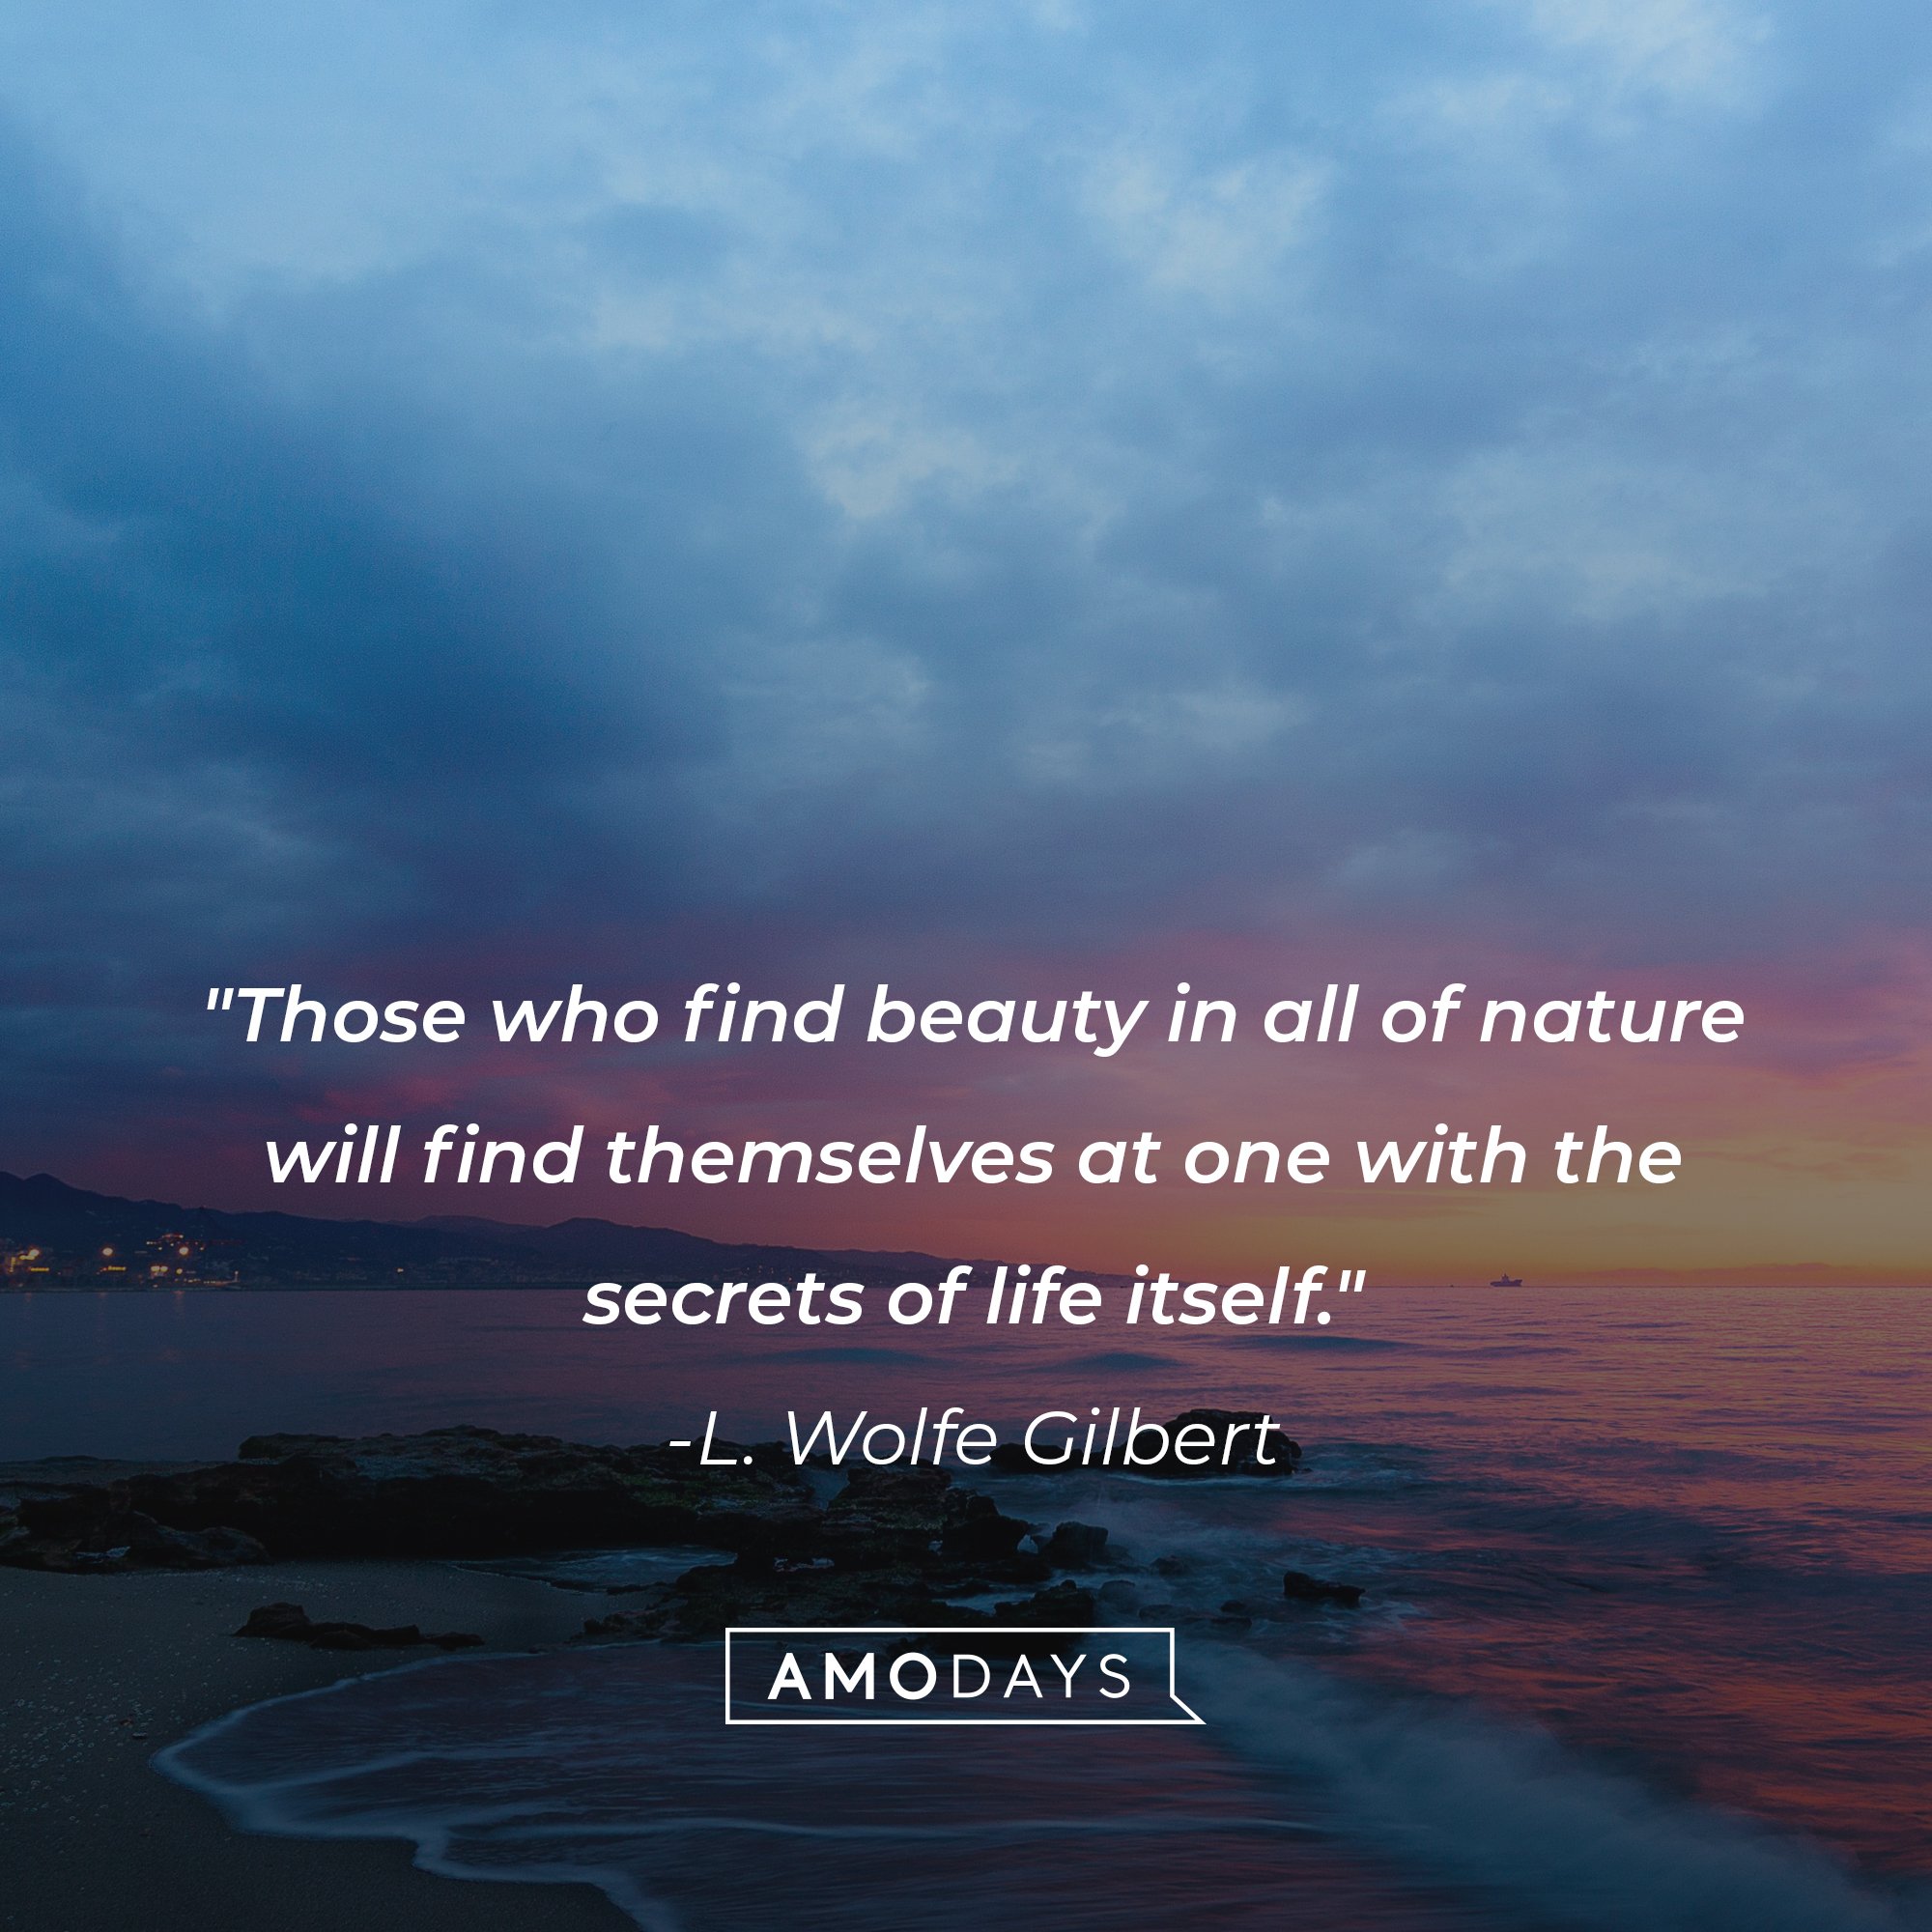 L. Wolfe Gilbert's quote: "Those who find beauty in all of nature will find themselves at one with the secrets of life itself." | Image: AmoDays